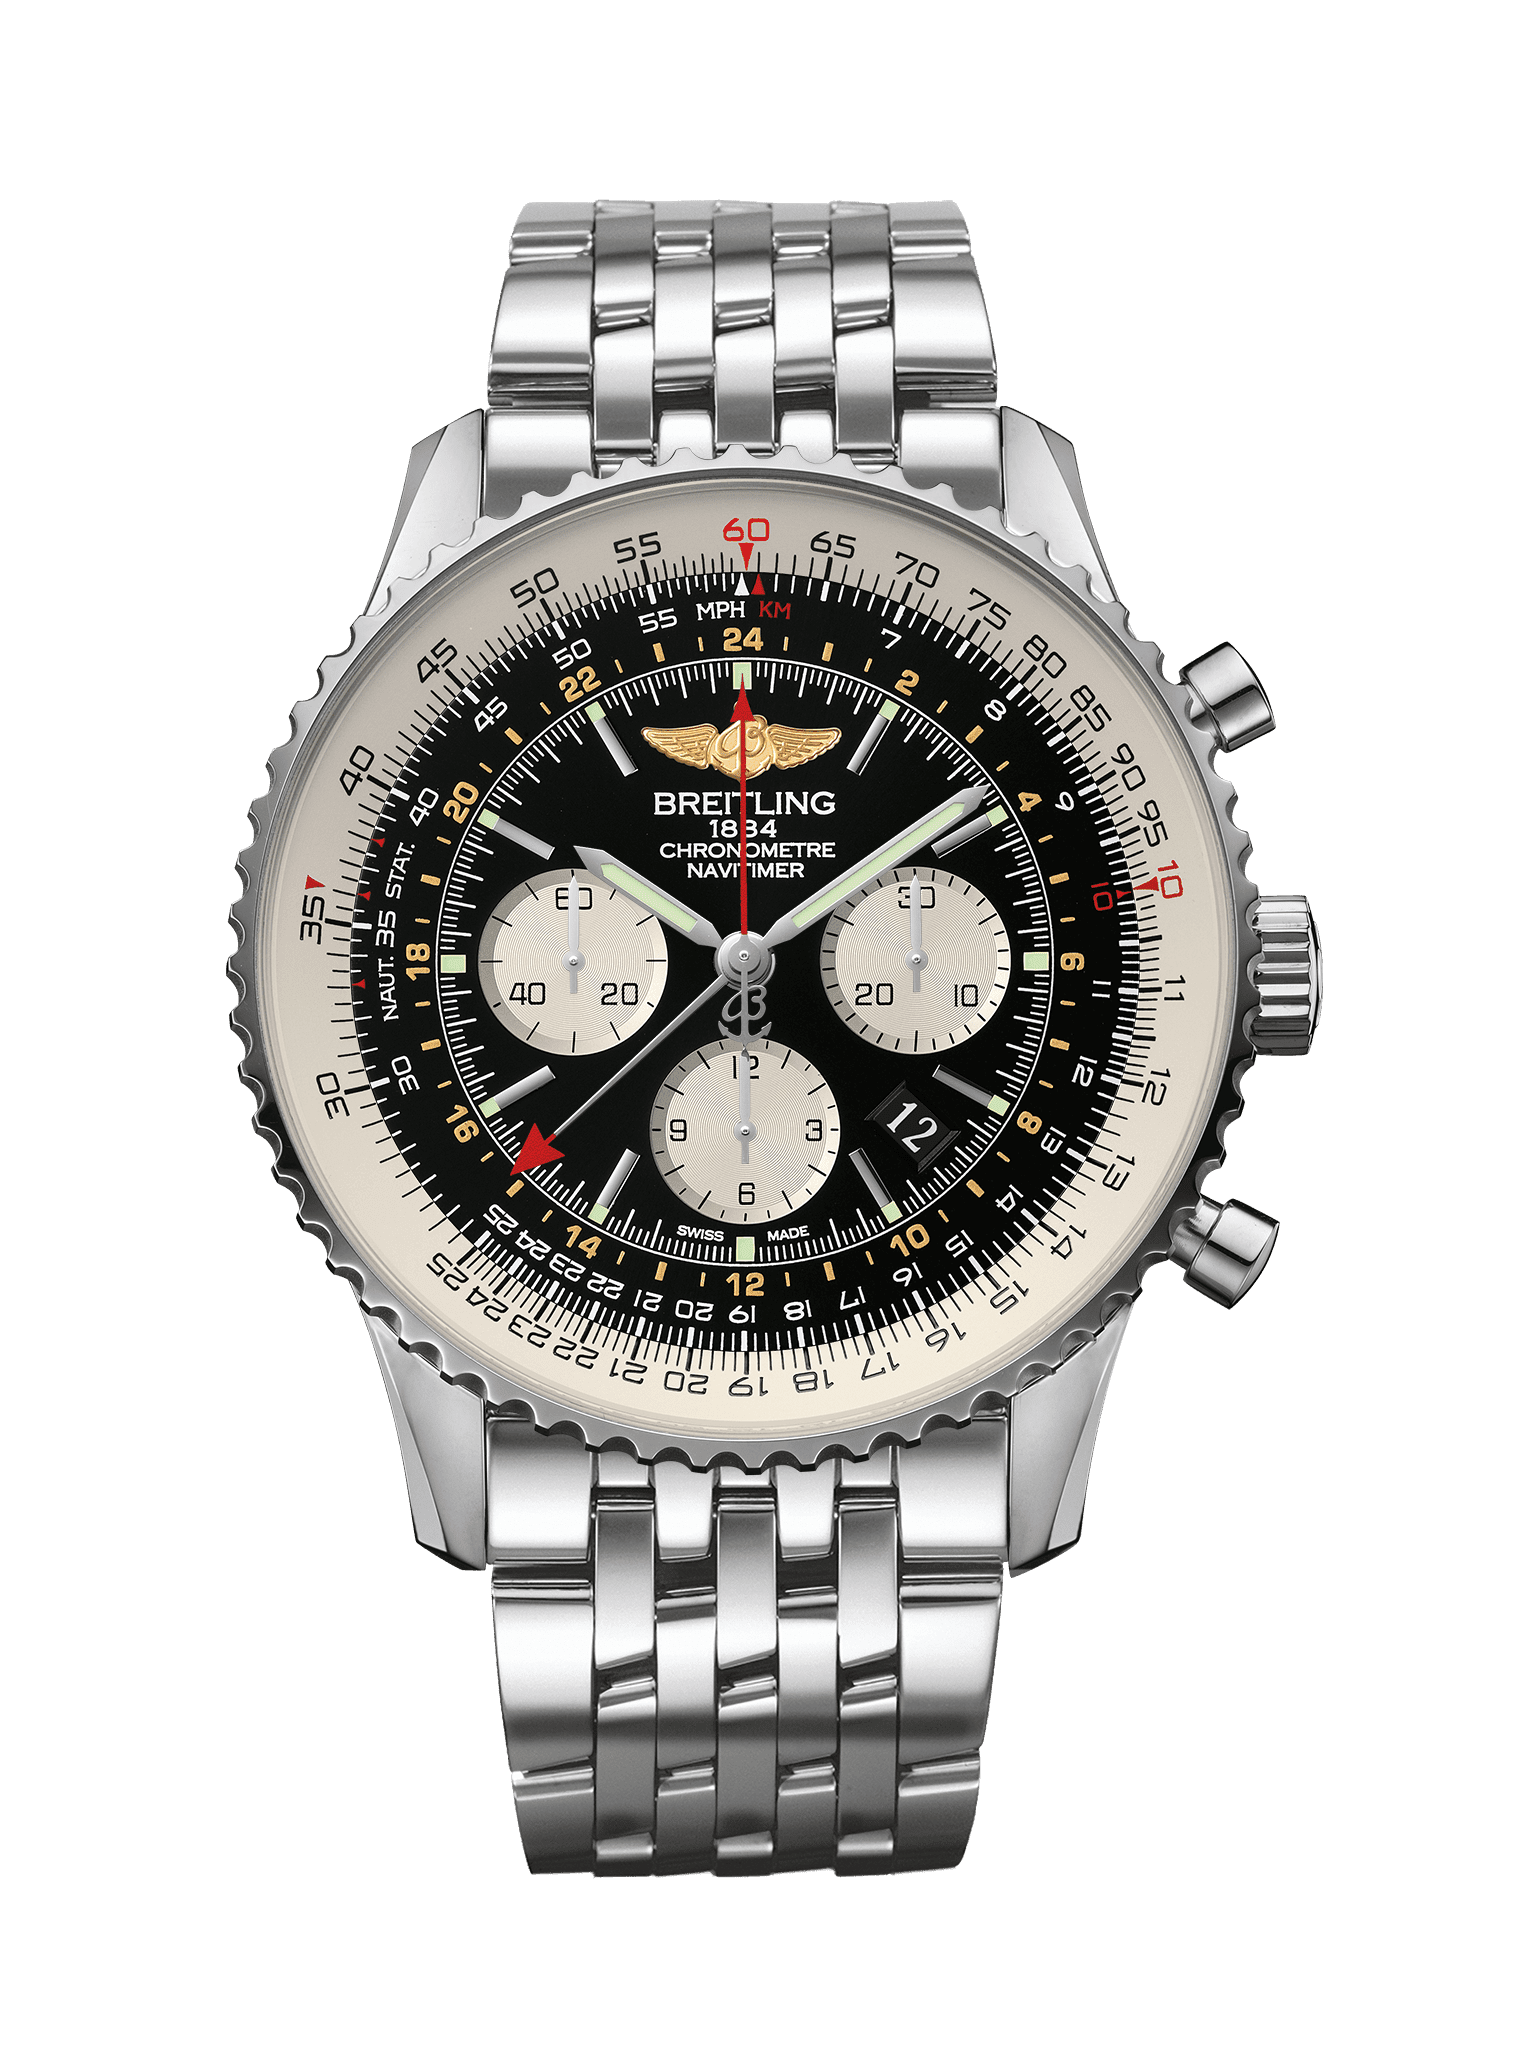 The breitling chronometer automatic watch stainless steel 42